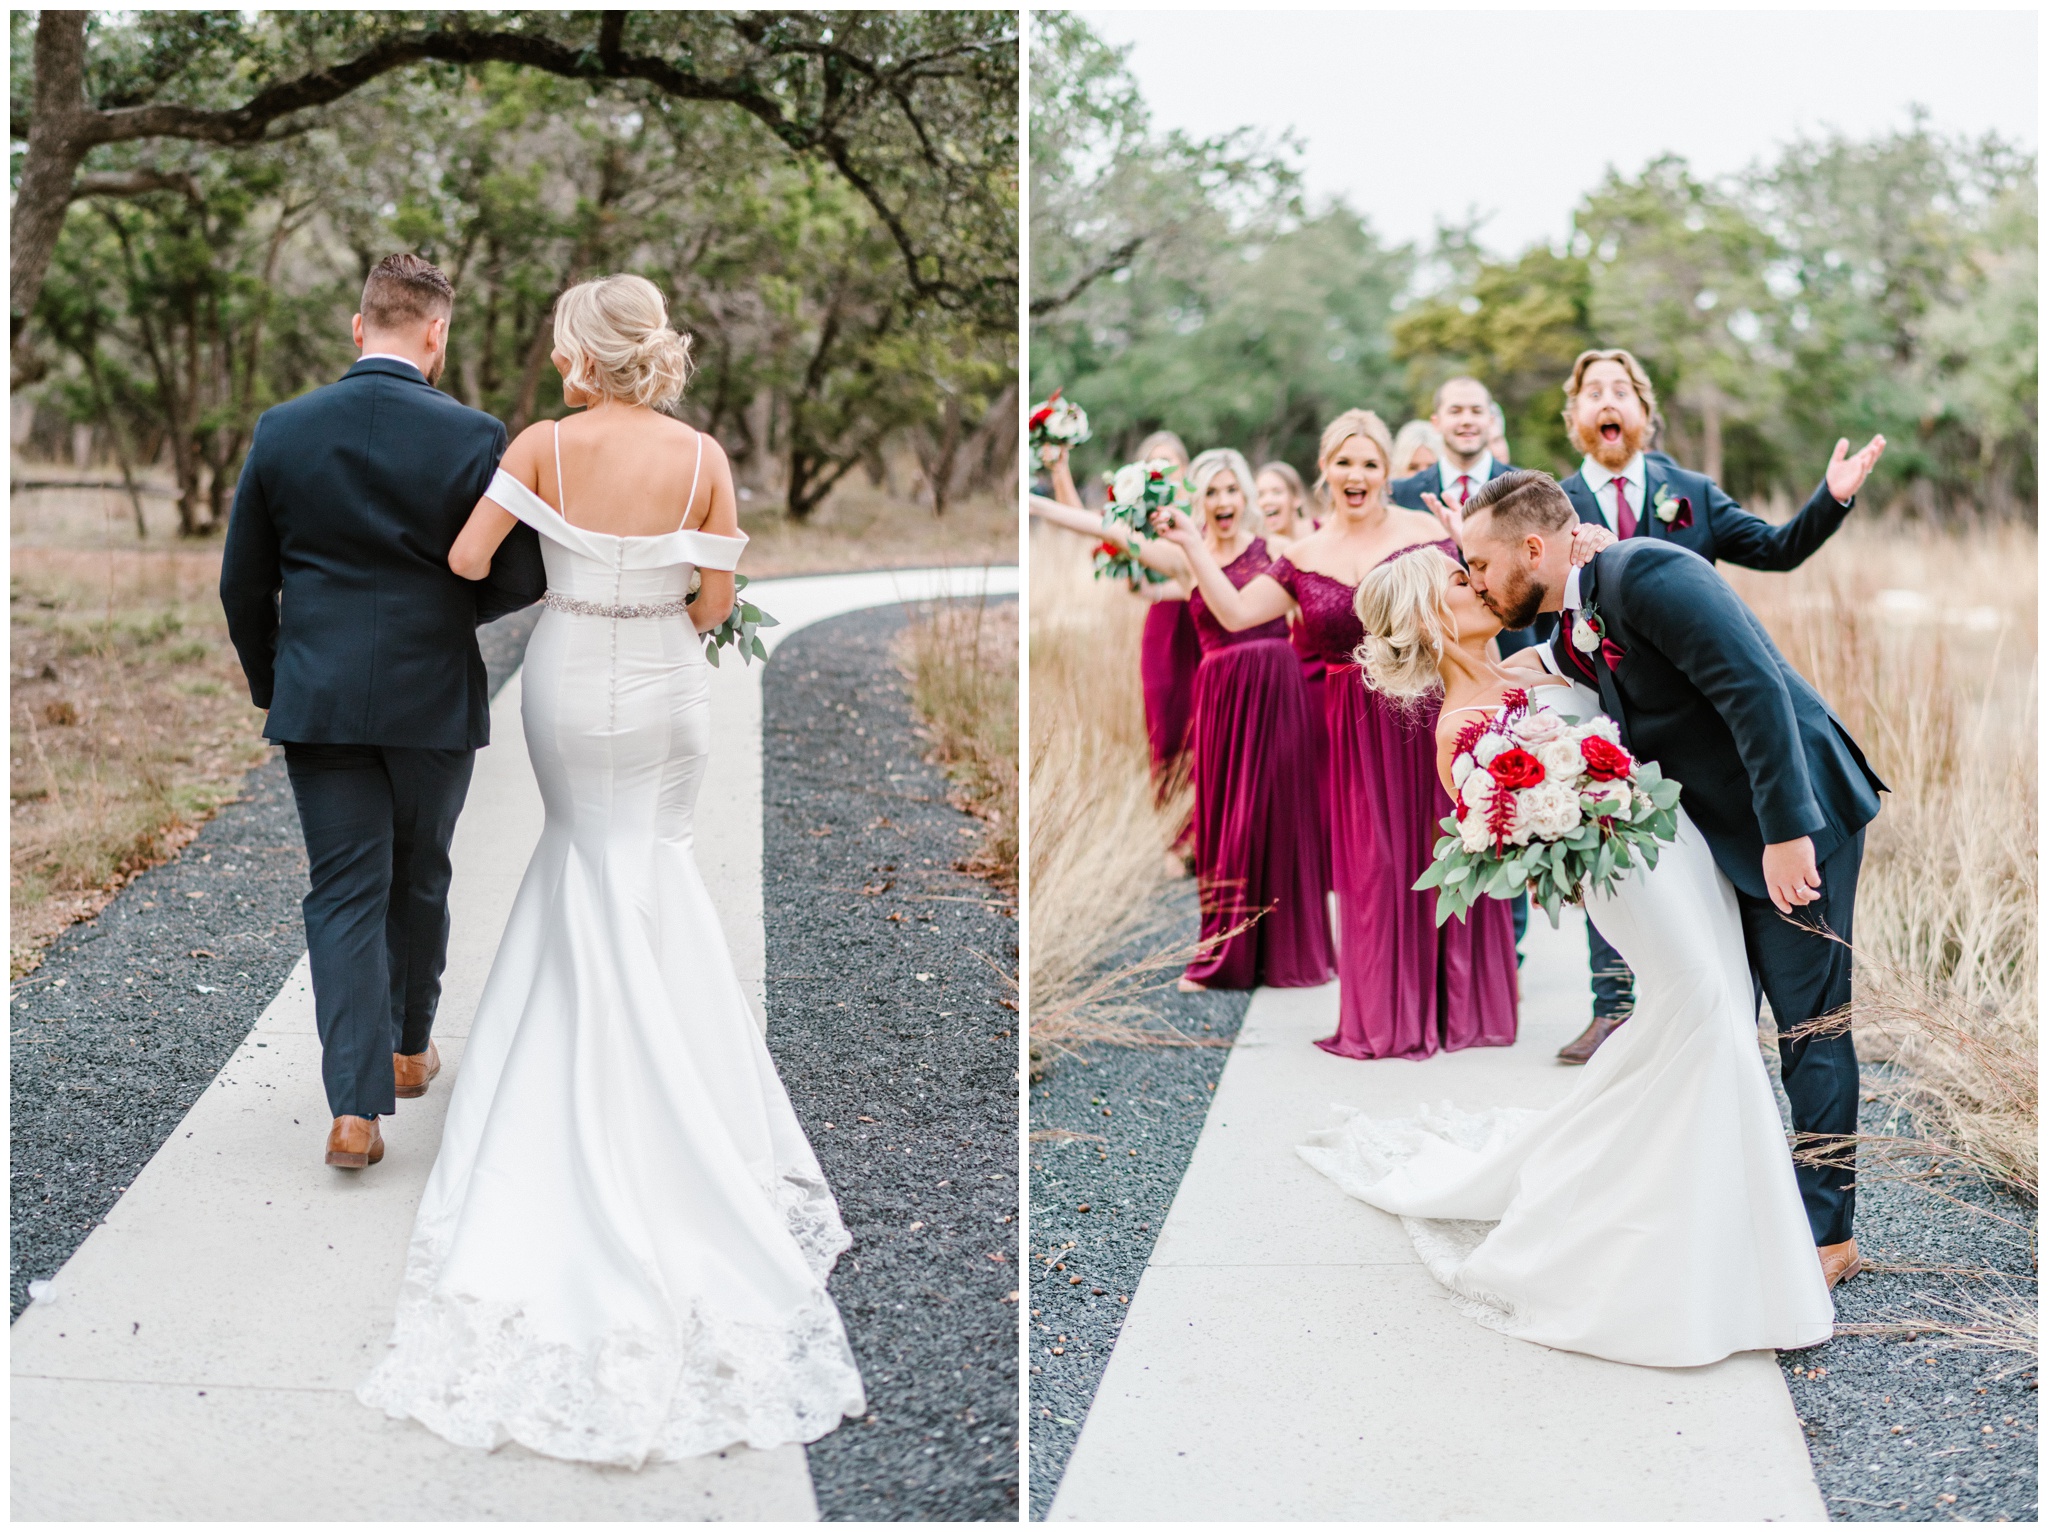 Just married photo inspiration with bridal party, Light and airy wedding ceremony photography, light and airy wedding photographer, Joslyn Holtfort Photography